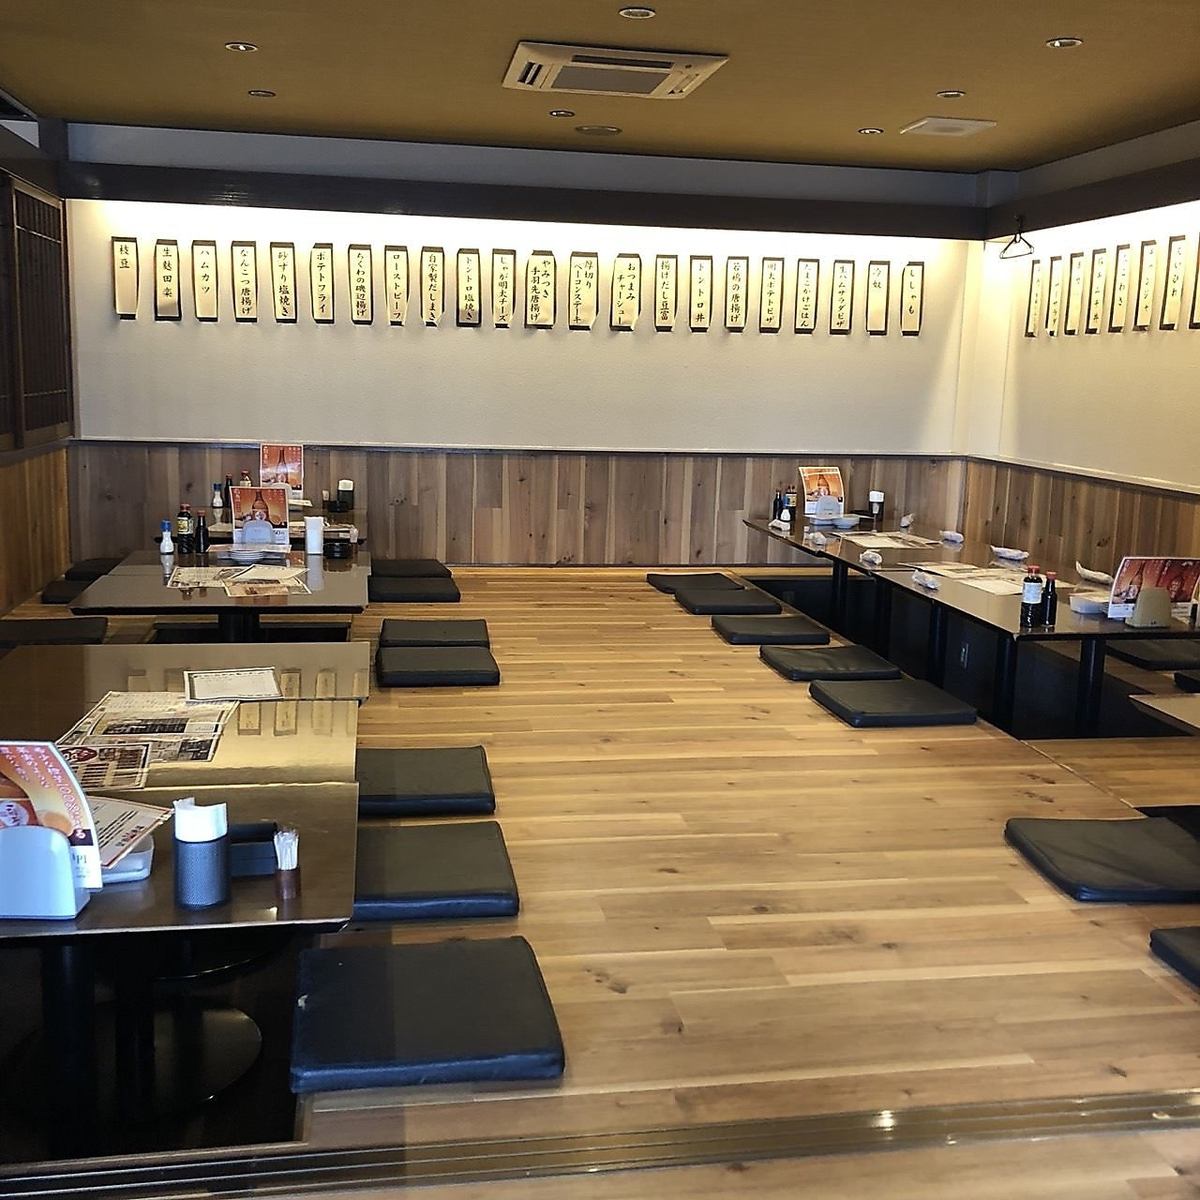 [2 minutes walk from Katata Station] All seats are sunken kotatsu seats! Perfect for large groups of 20-30 people.